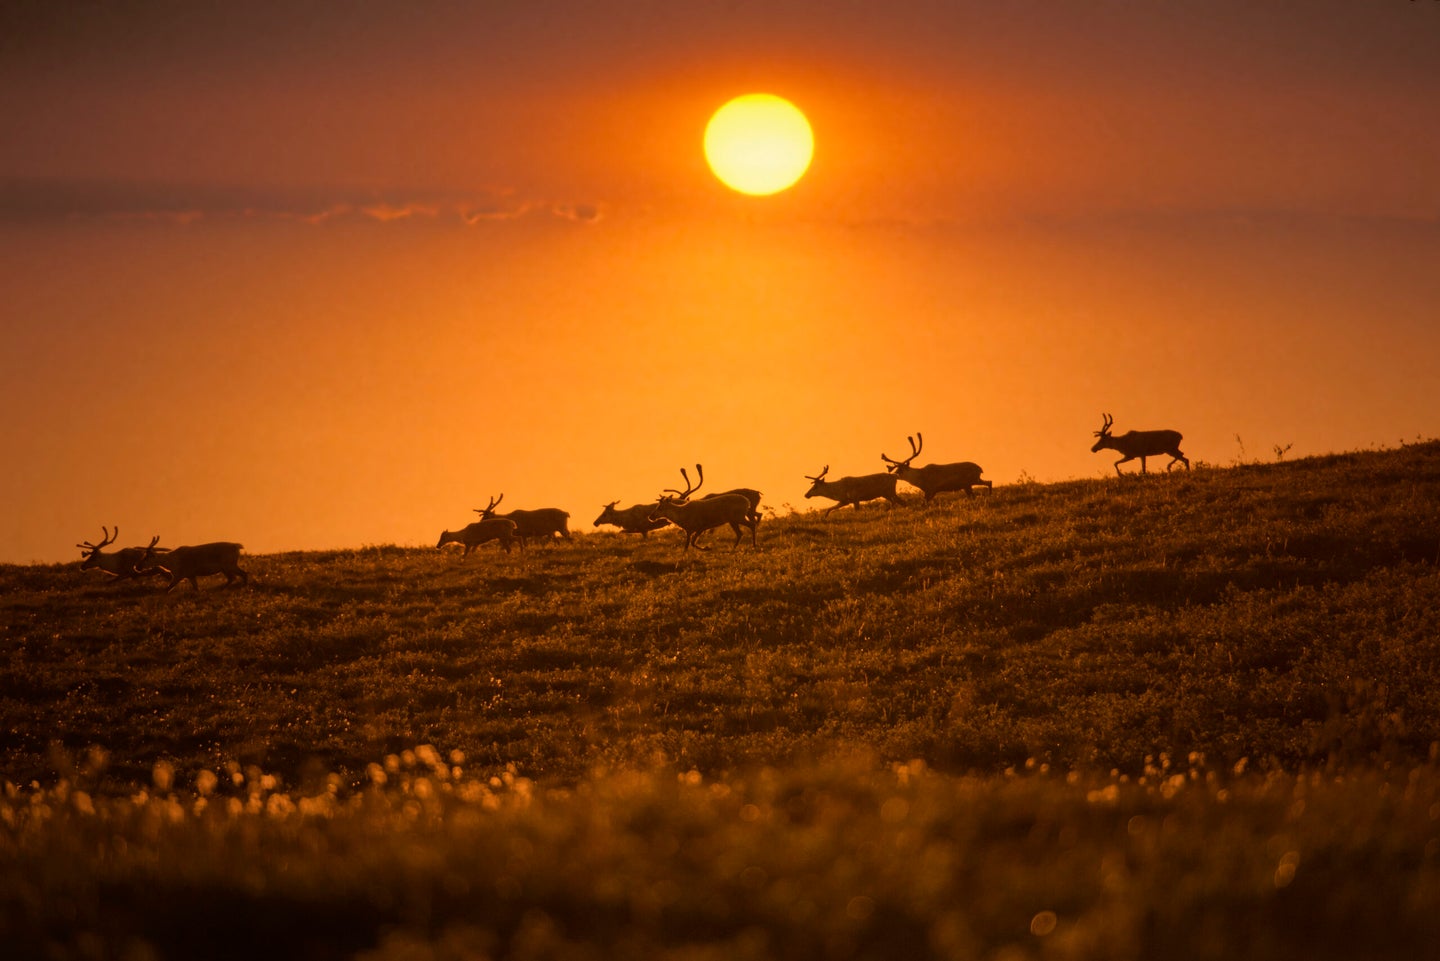 members of Western Arctic Caribou herd migrate during sunset